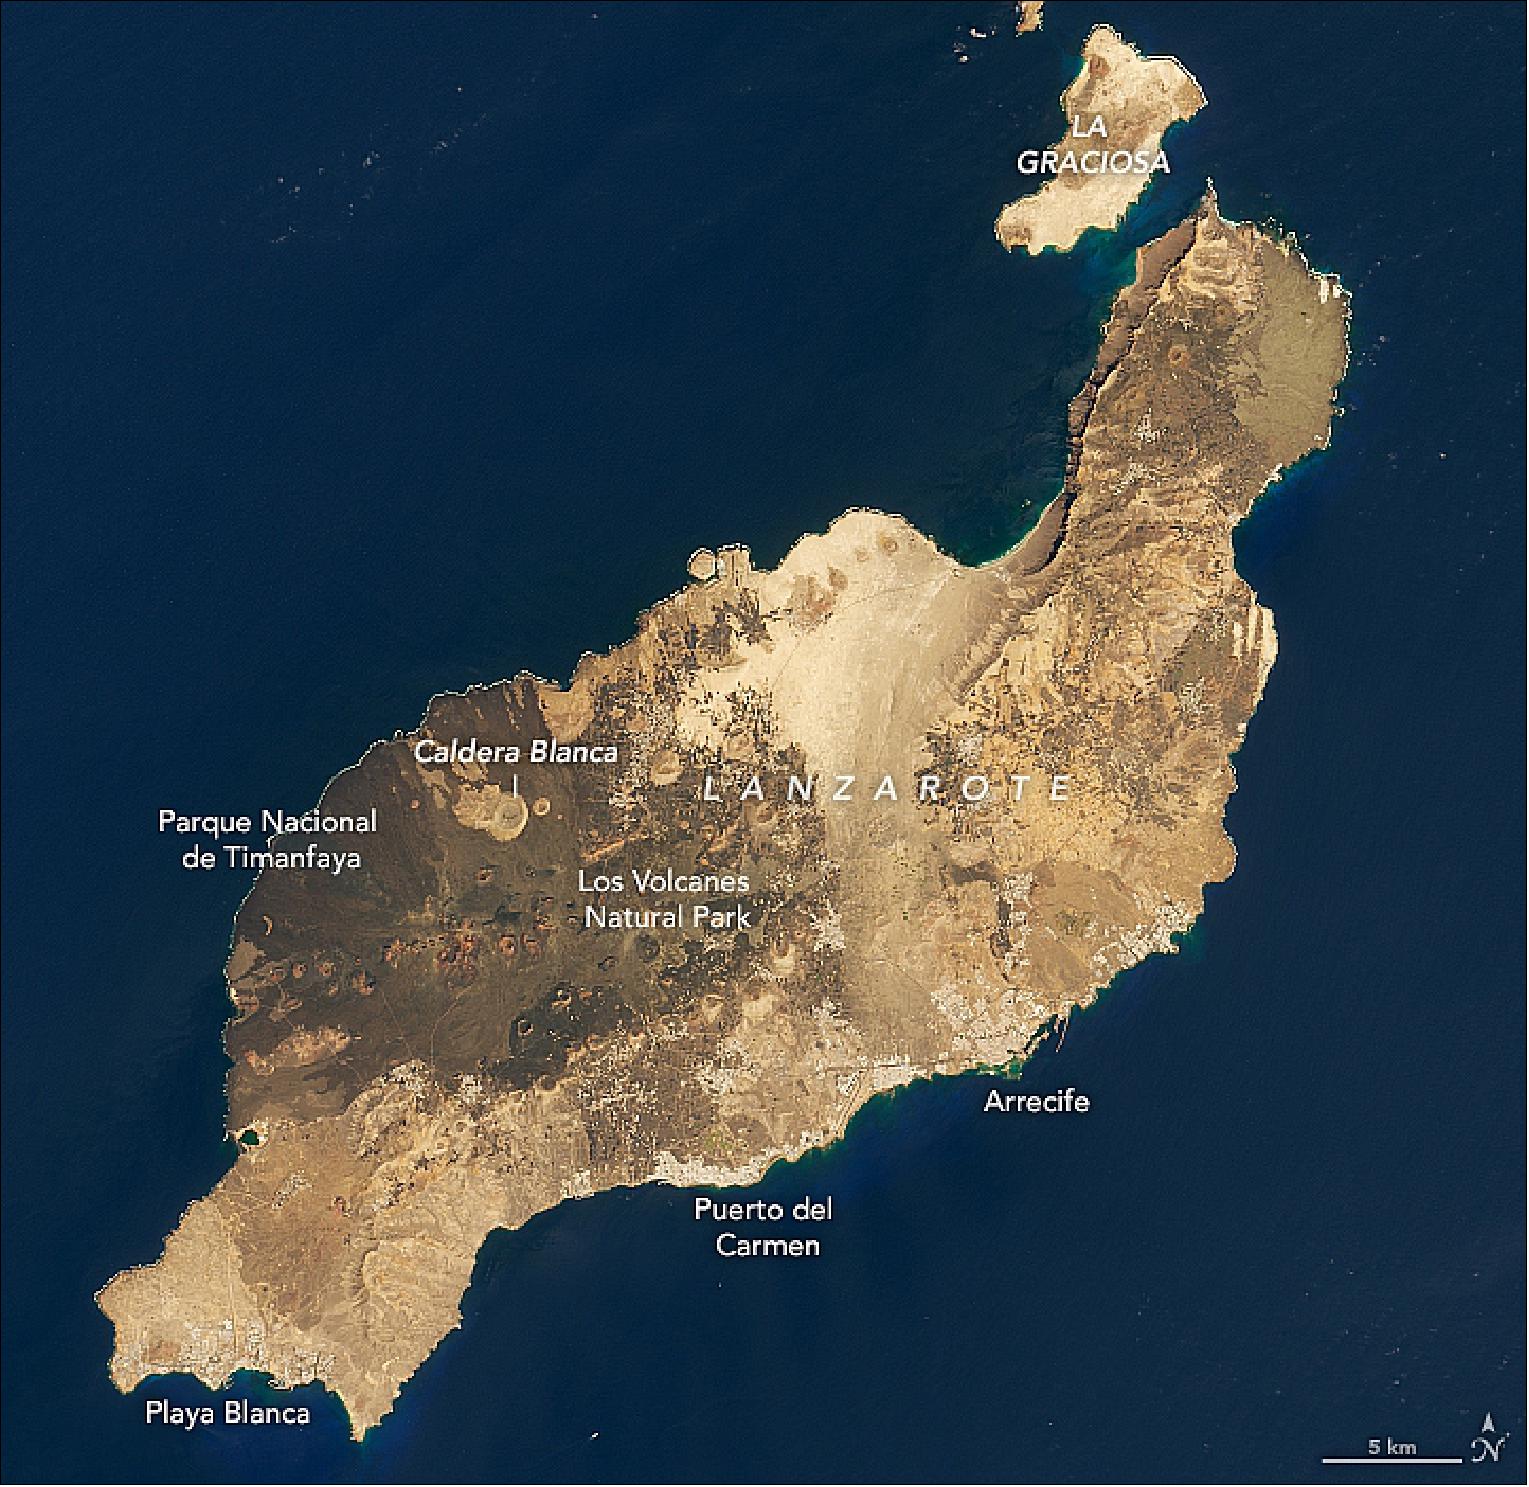 Figure 3: Overview of the Canary Island of Lanzarote, acquired with OLI on Landsat-8 on 2 October 2019 (image credit: NASA Earth Observatory, image by Lauren Dauphin, using Landsat data from the U.S. Geological Survey. Story by Kathryn Hansen)